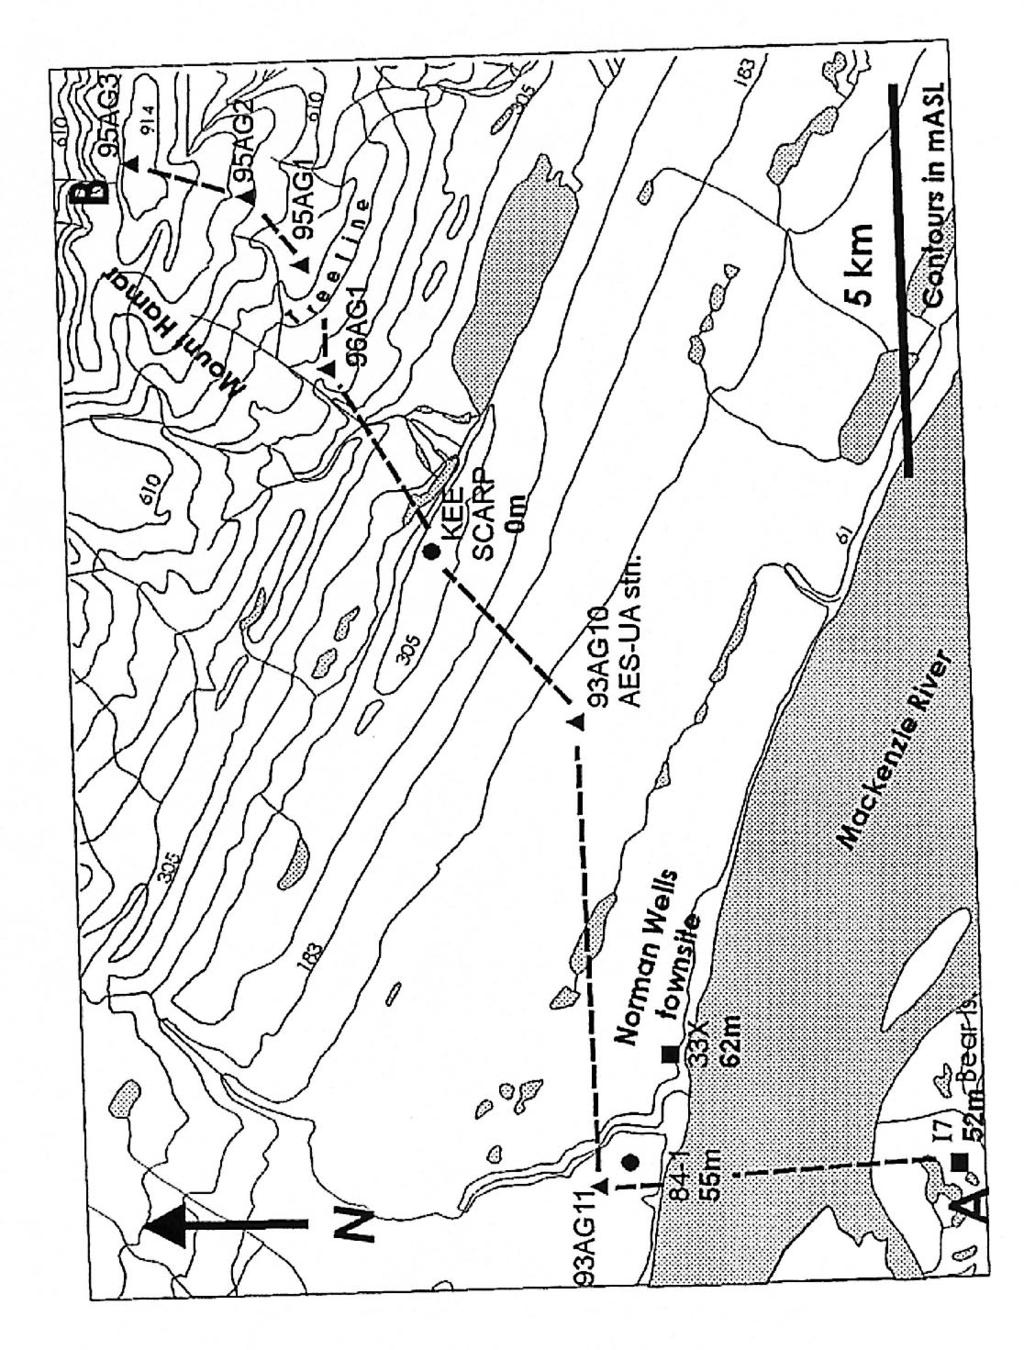 Figure 1 (a). Location of Norman Wells and Mount Hamar in the Mackenzie Valley, discontinuous permafrost zone, Canada. Sites are labelled, e.g., "95"= 1995, year of installation; "AG"=air and ground temperatures; "3"=site number; "84-1", Norman Wells pipeline monitoring site; "33X", "I7", deep petroleum wells.